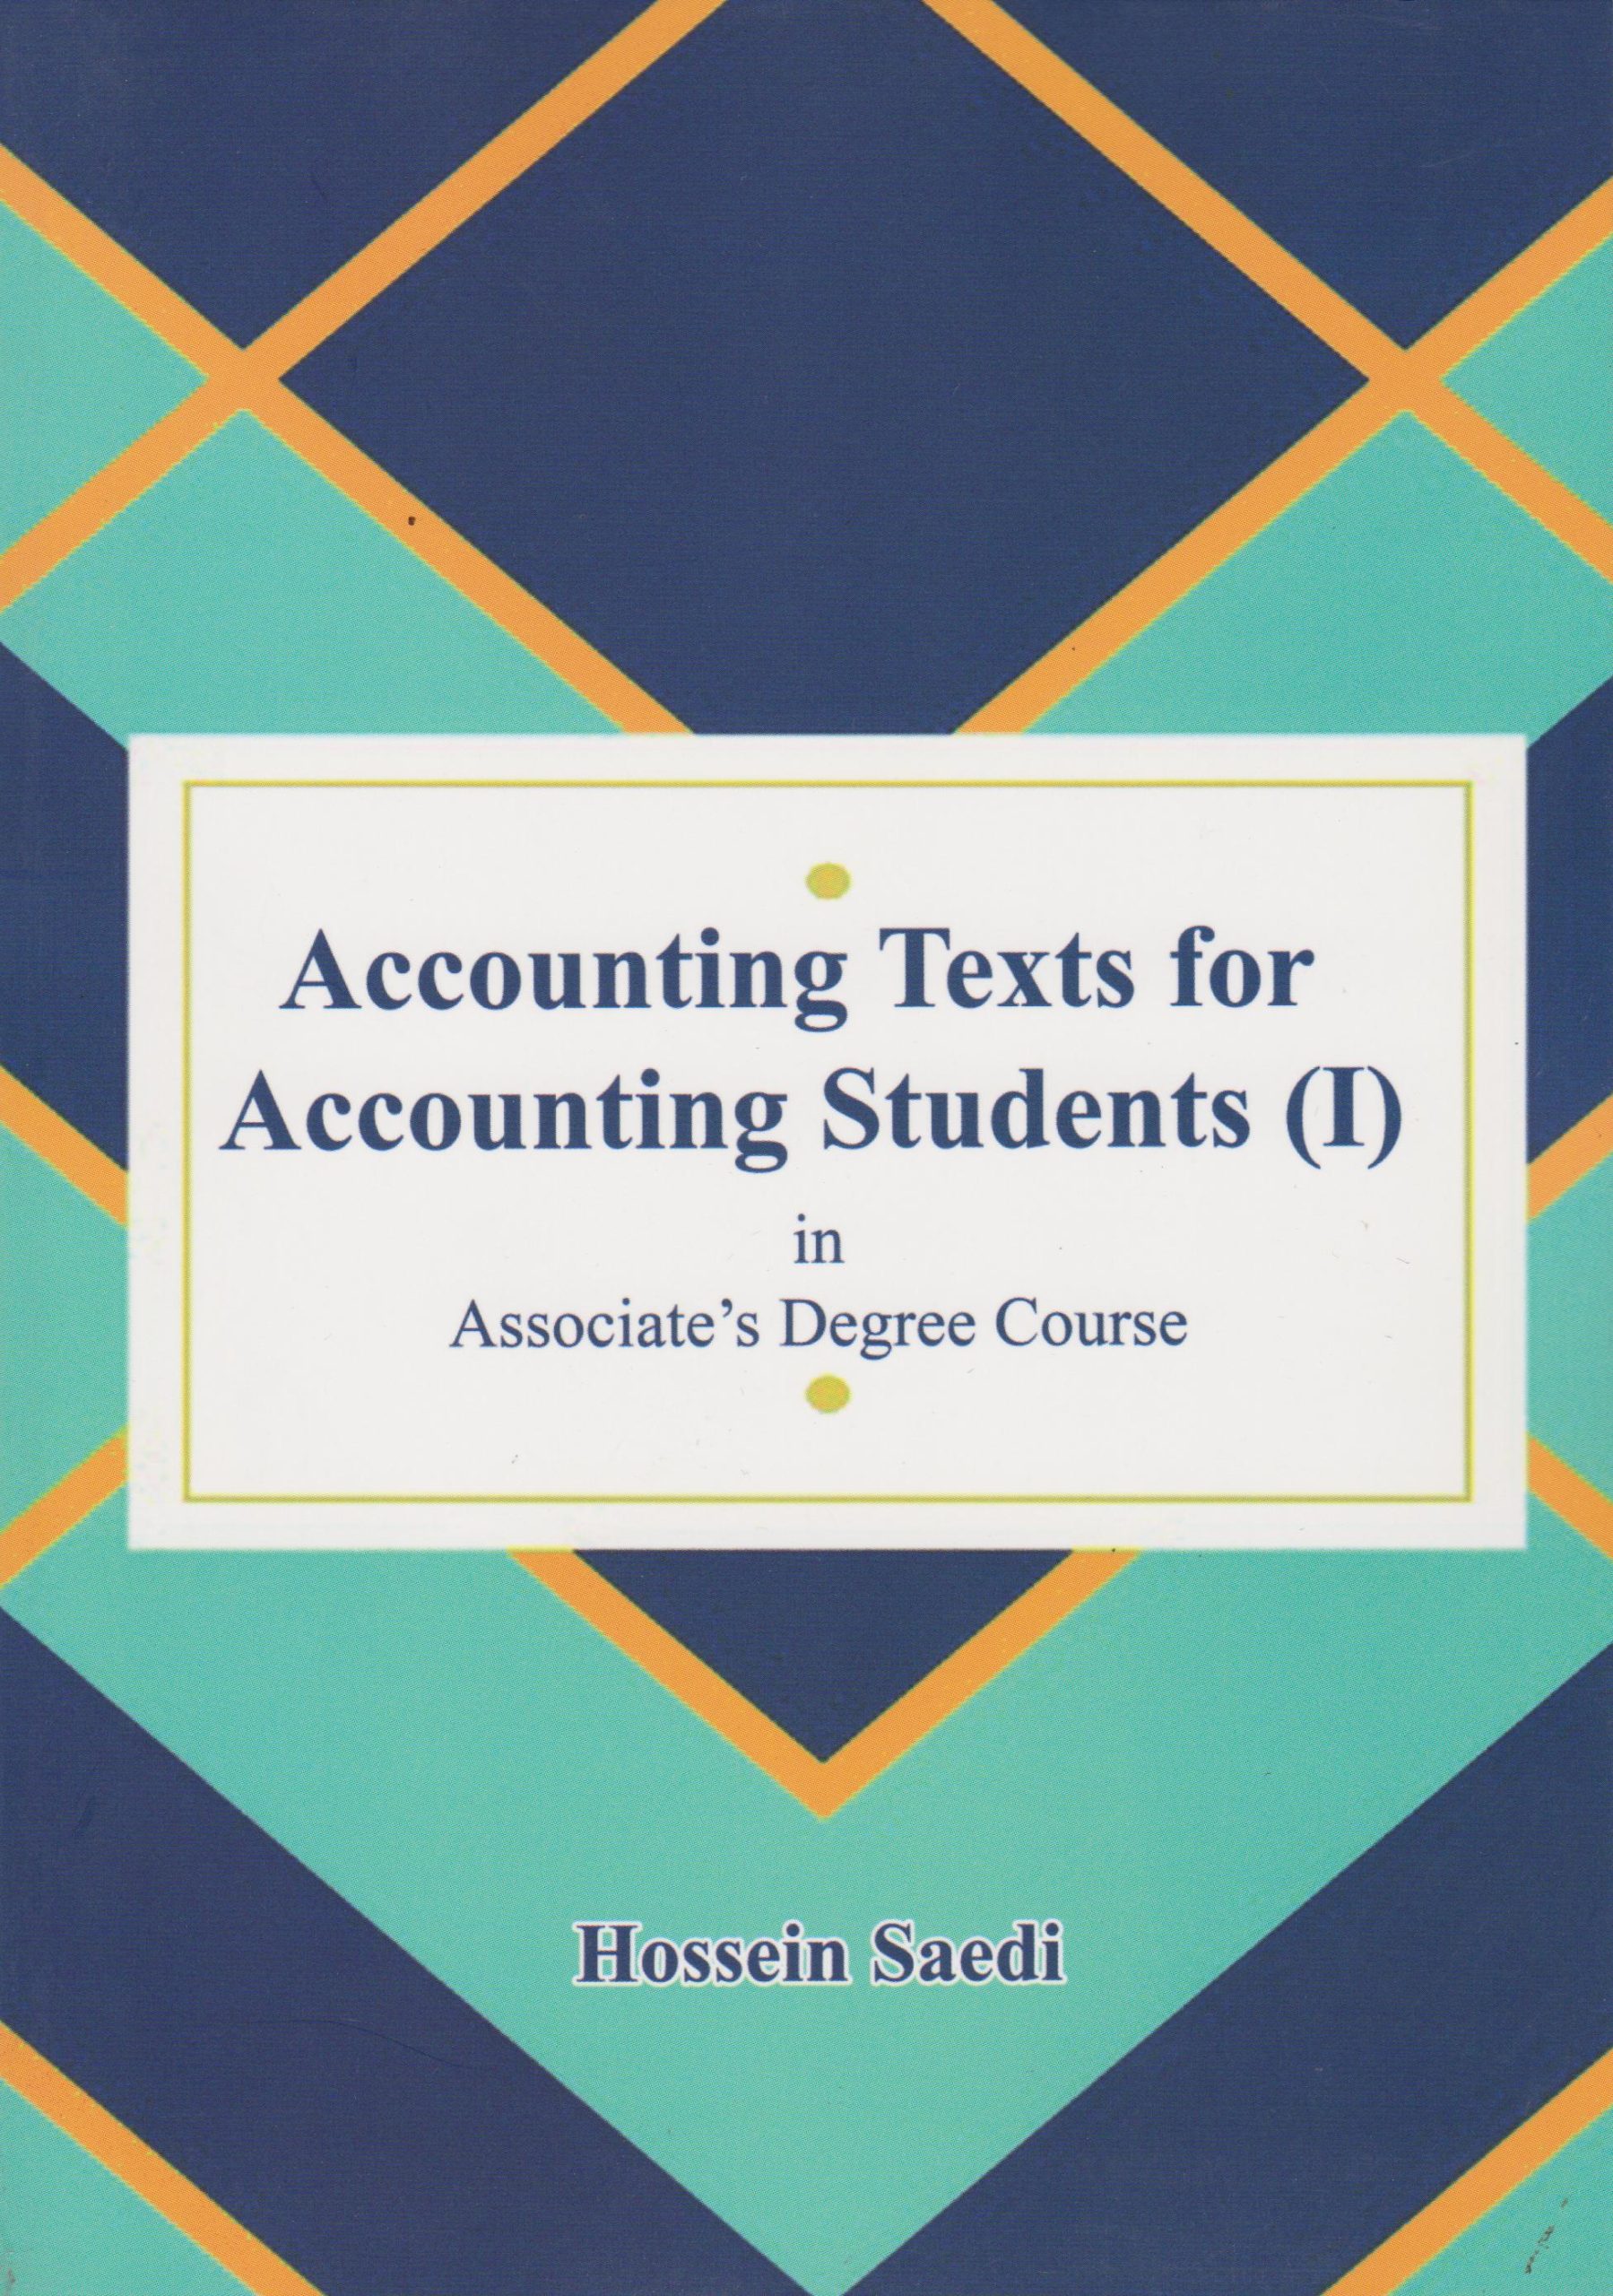 accouning texts for accounting students i 6501df40f0e31 scaled